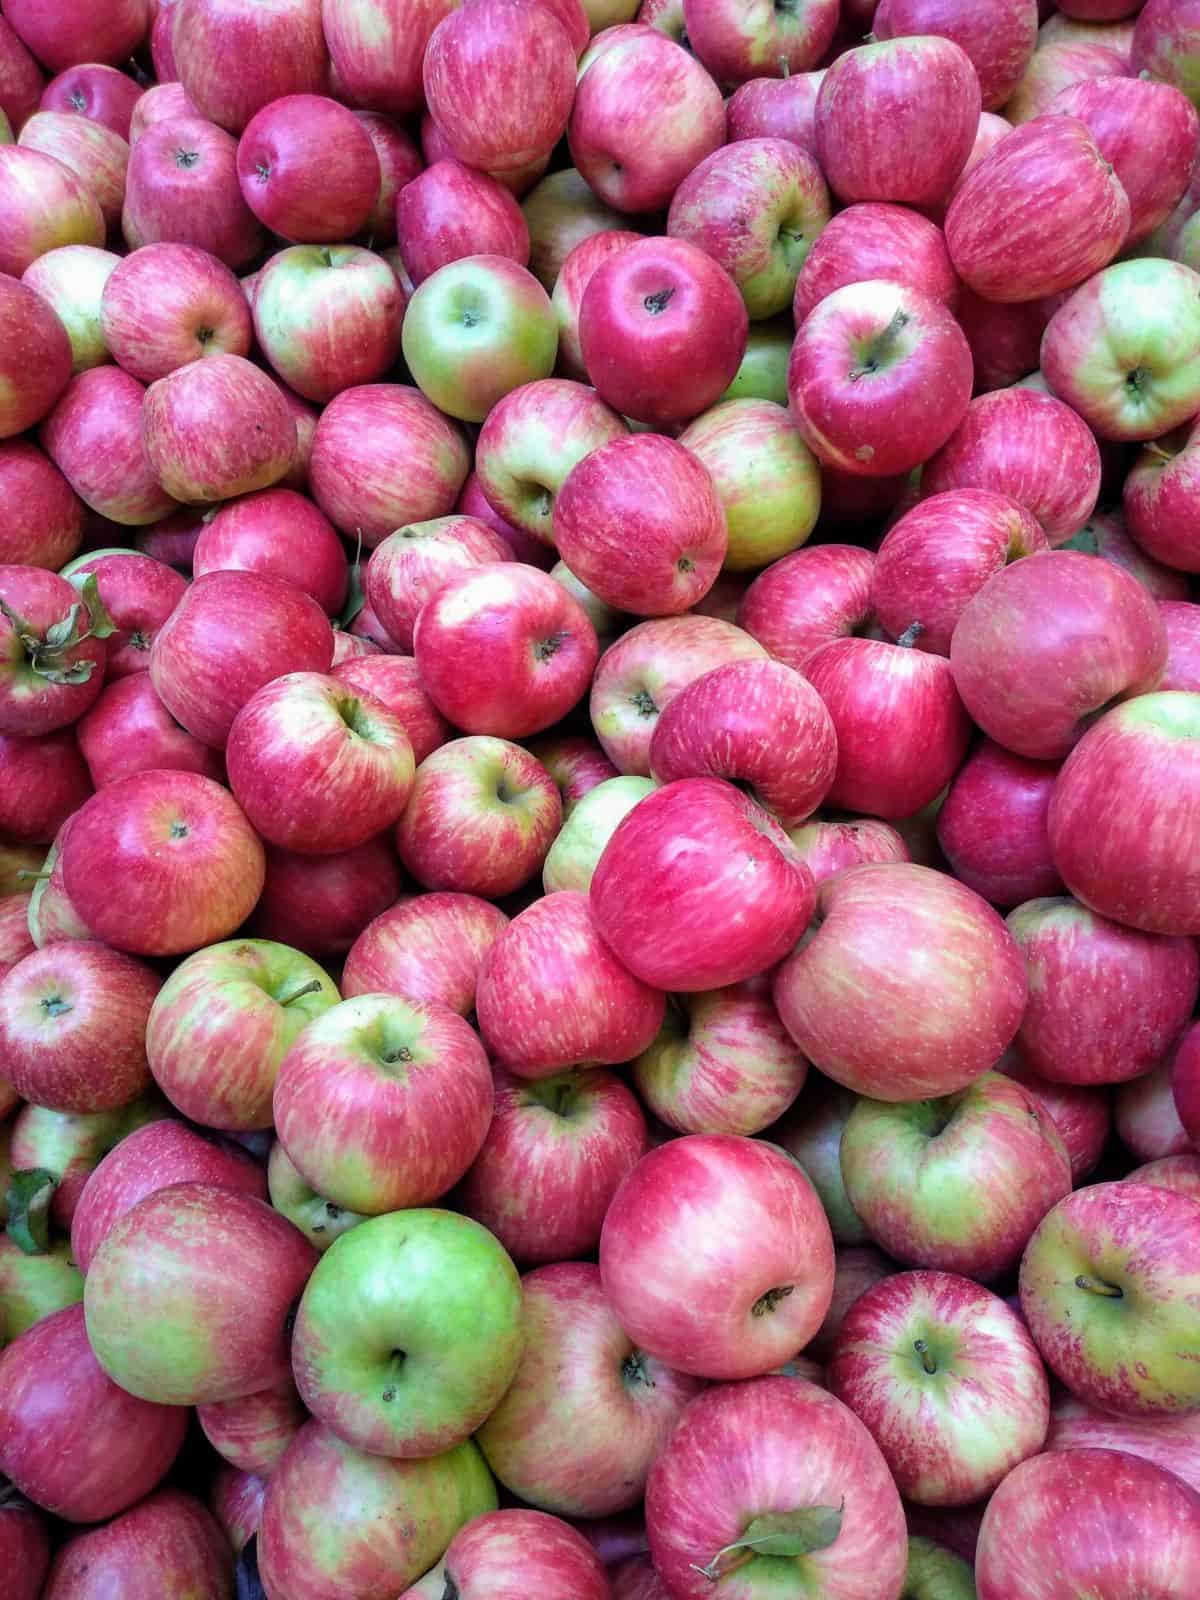 A close up of bin filled with green and red Honeycrisp apples.